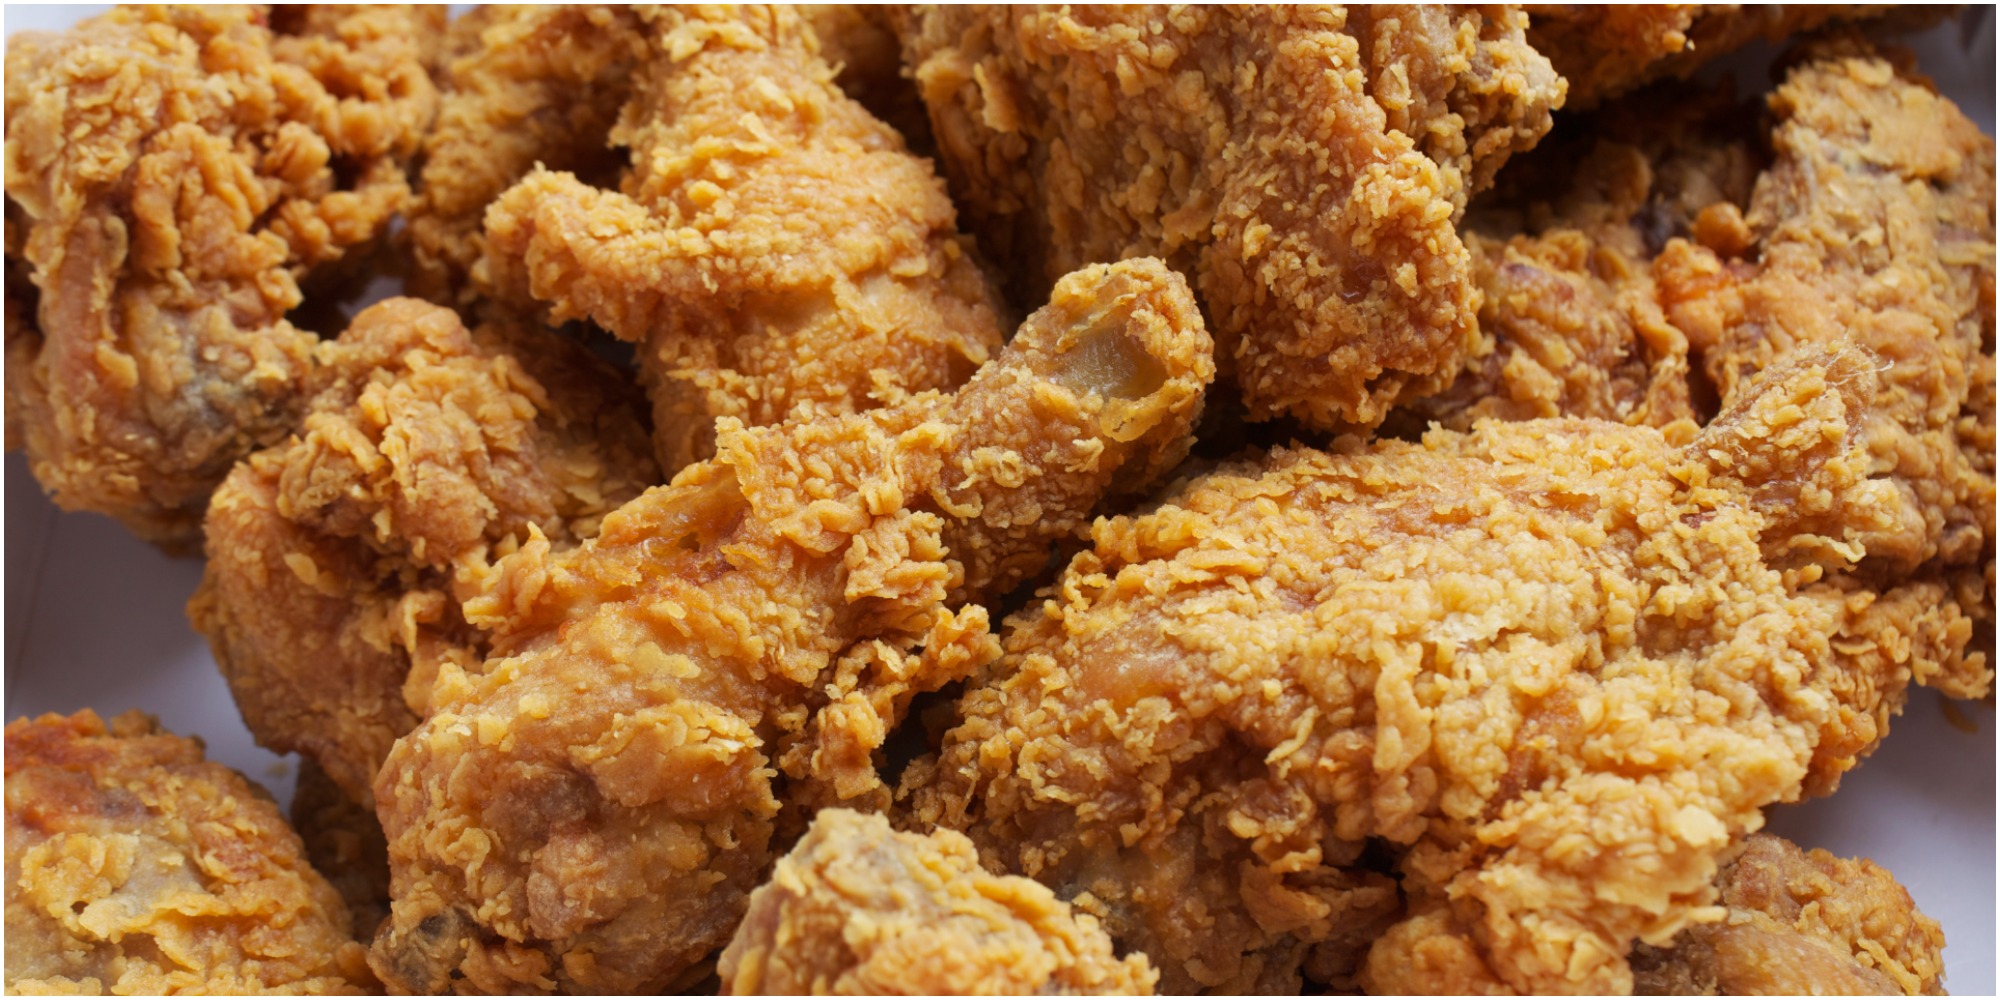 A plate of fried chicken.